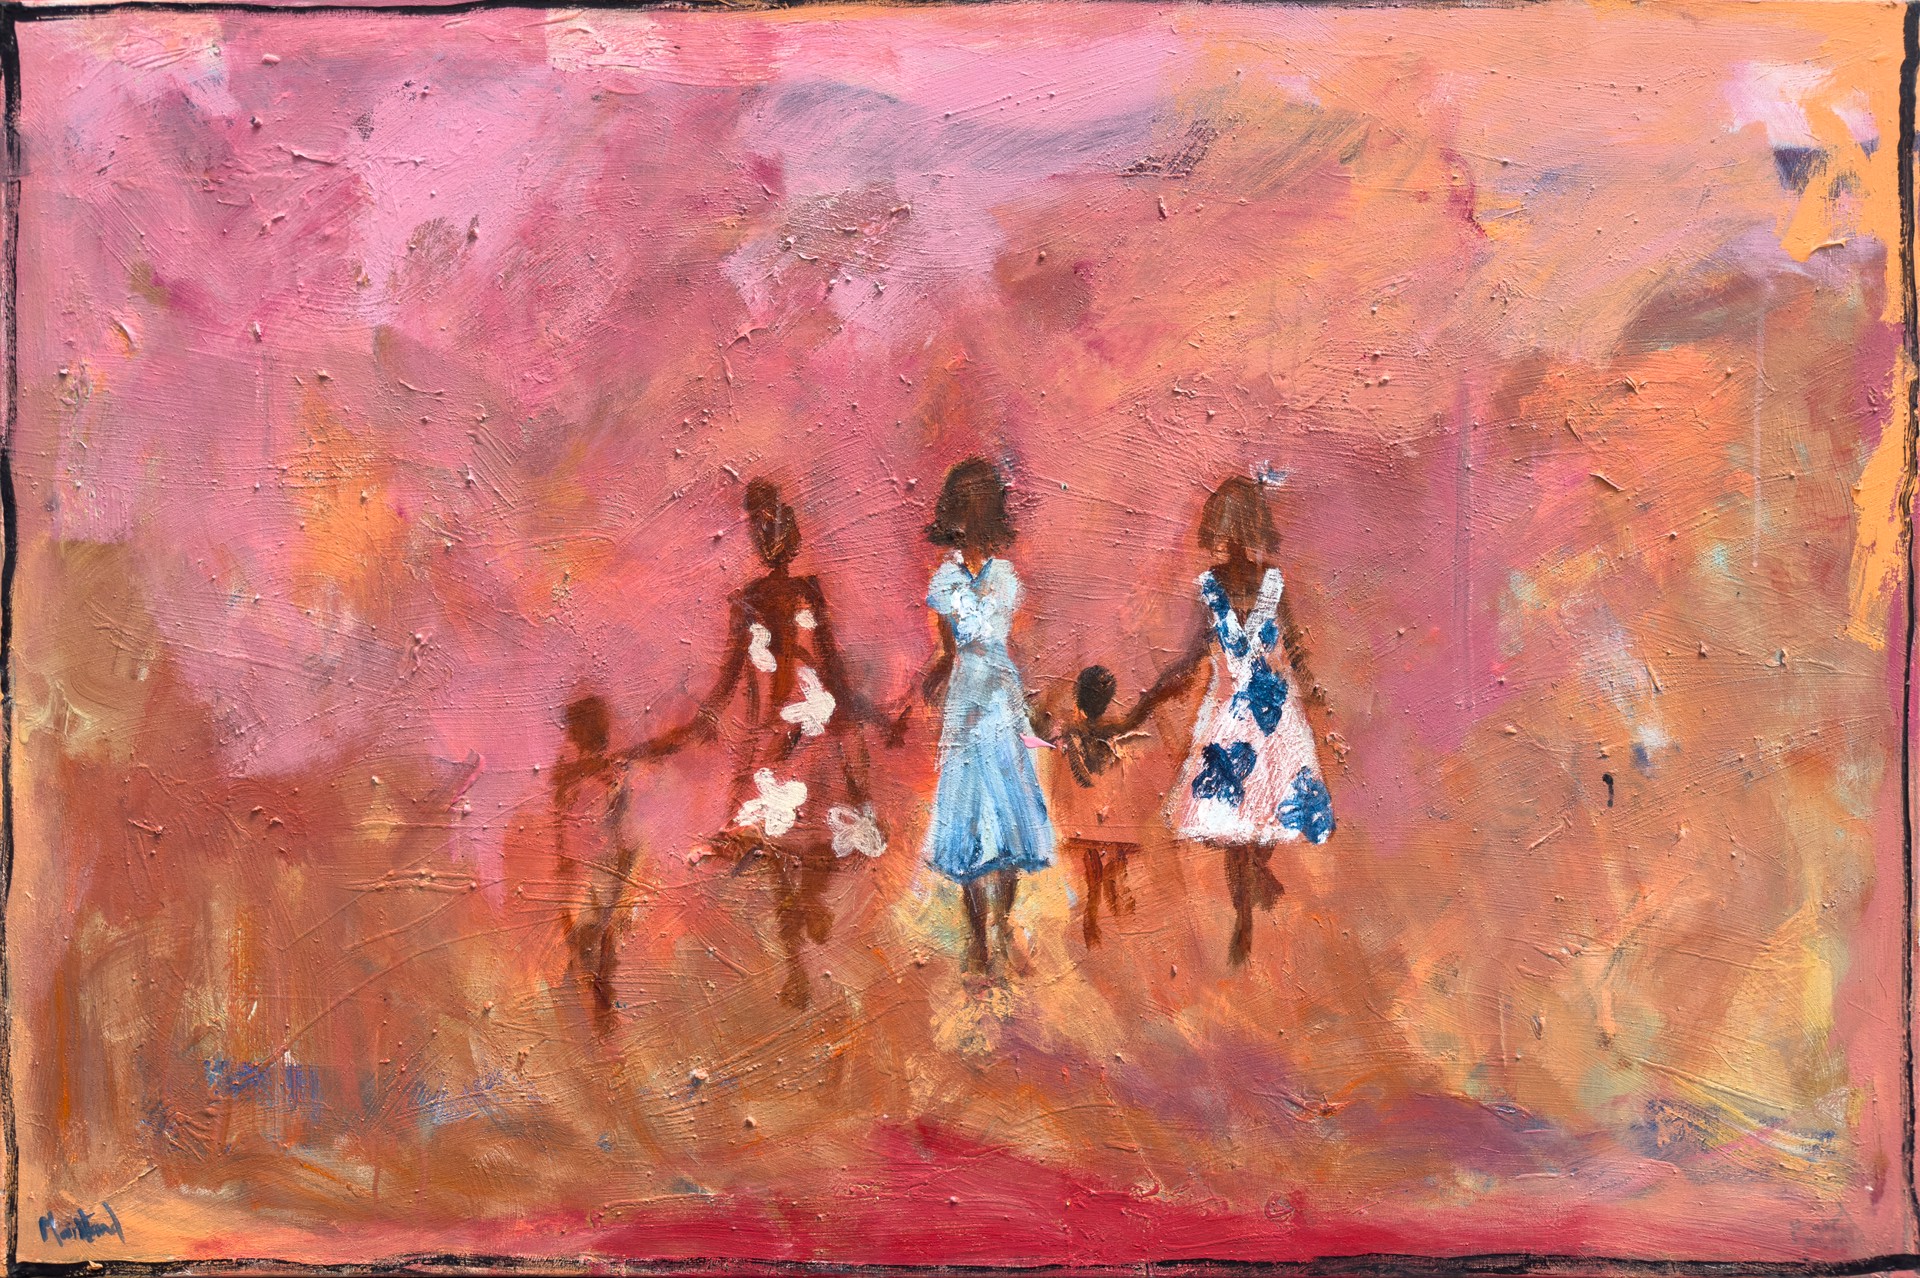 Figures in a Pink Landscape by John Maitland